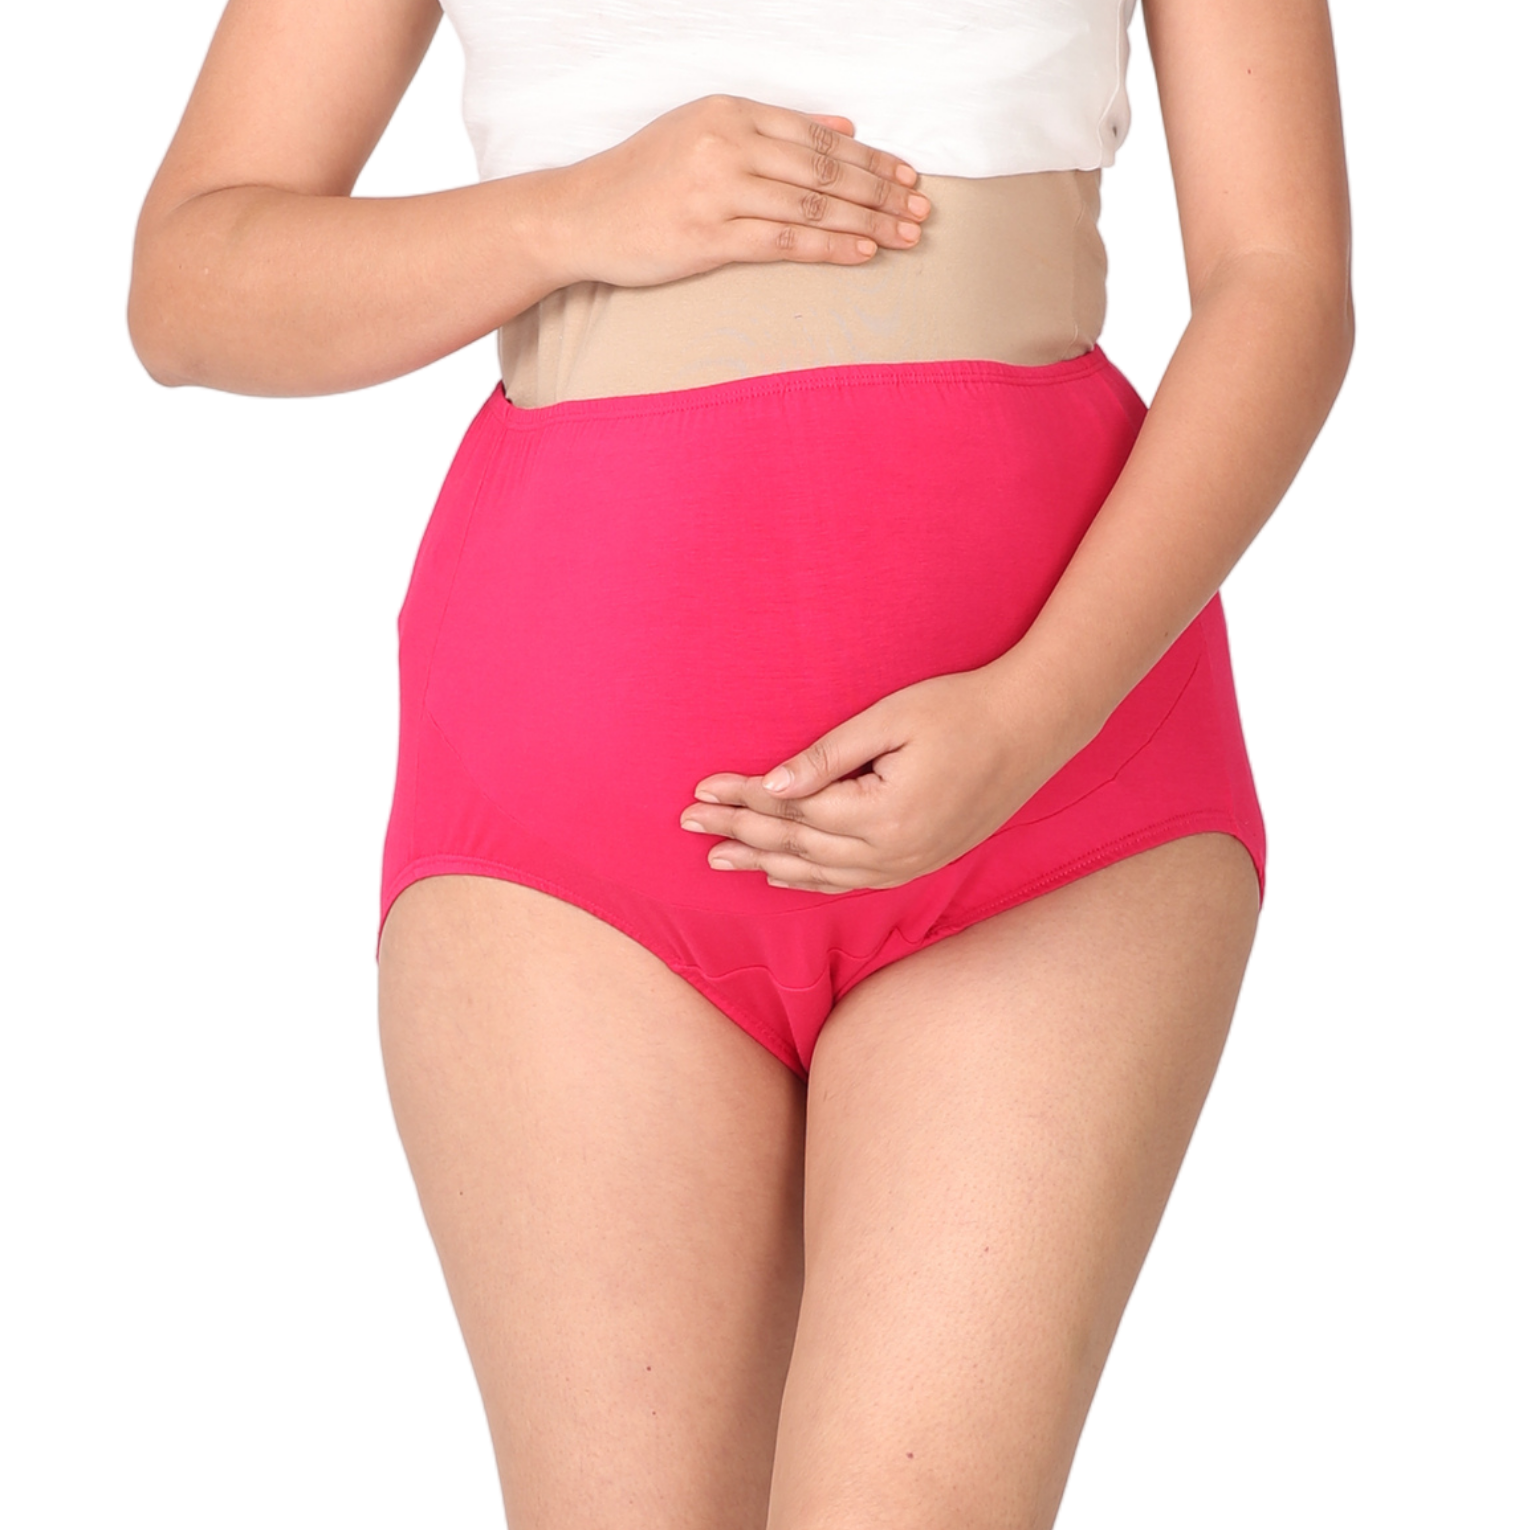 Buy Morph Maternity, Pregnancy Panty For Women, With High Waist For Women, Over The Belly Fit, Full Back Coverage, Pregnancy & Post Delivery, Pack Of 2